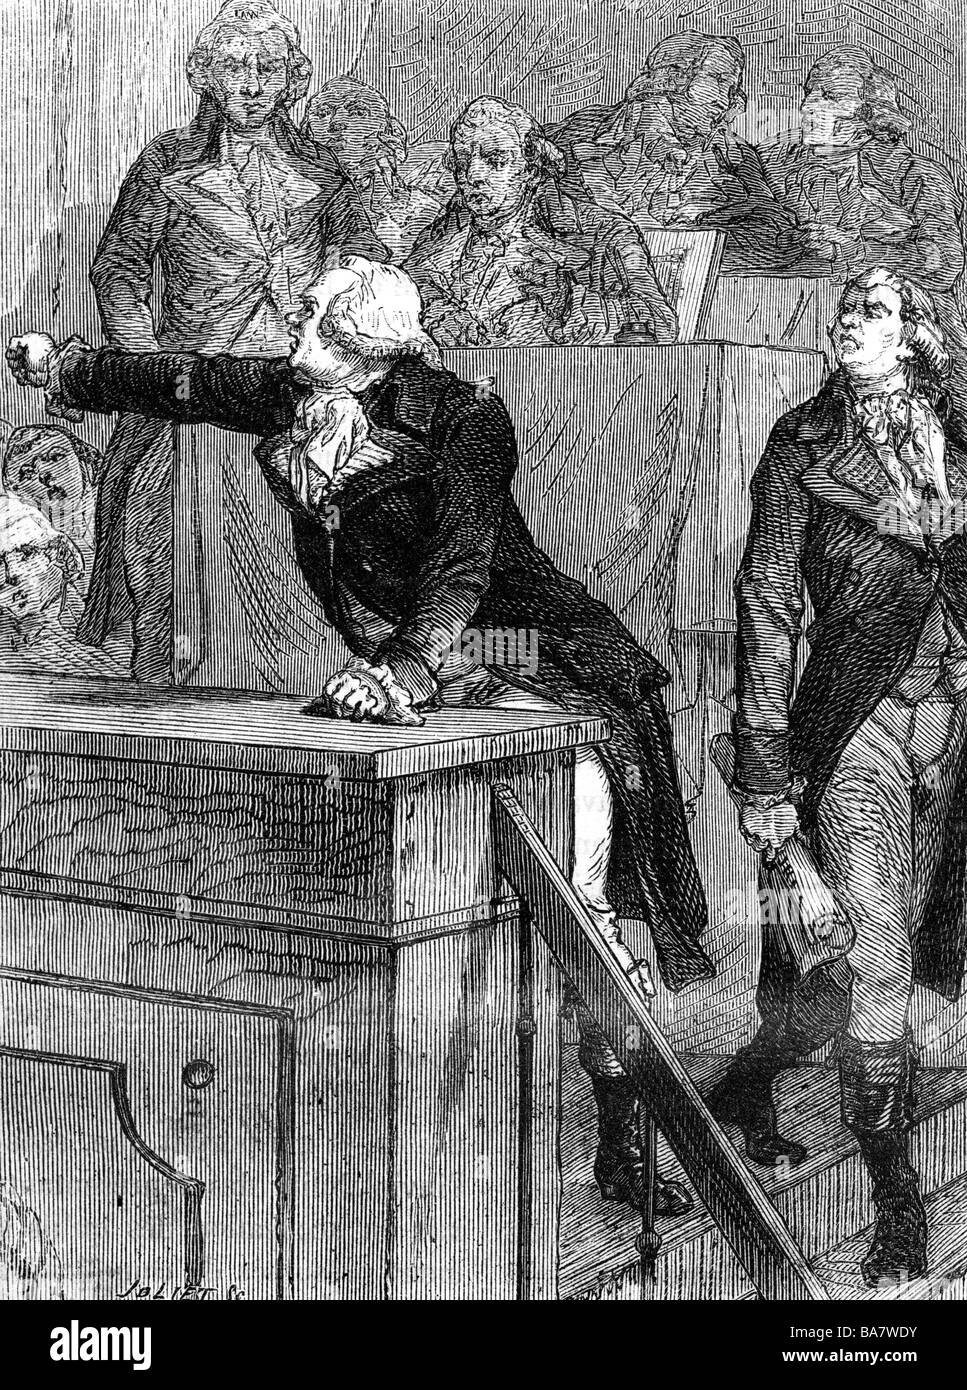 Danton, Georges Jacques, 26.10.1759 - 5.4.1794, French revolutionist, scene, speaking in an assembly, wood engraving, 19th century, Stock Photo